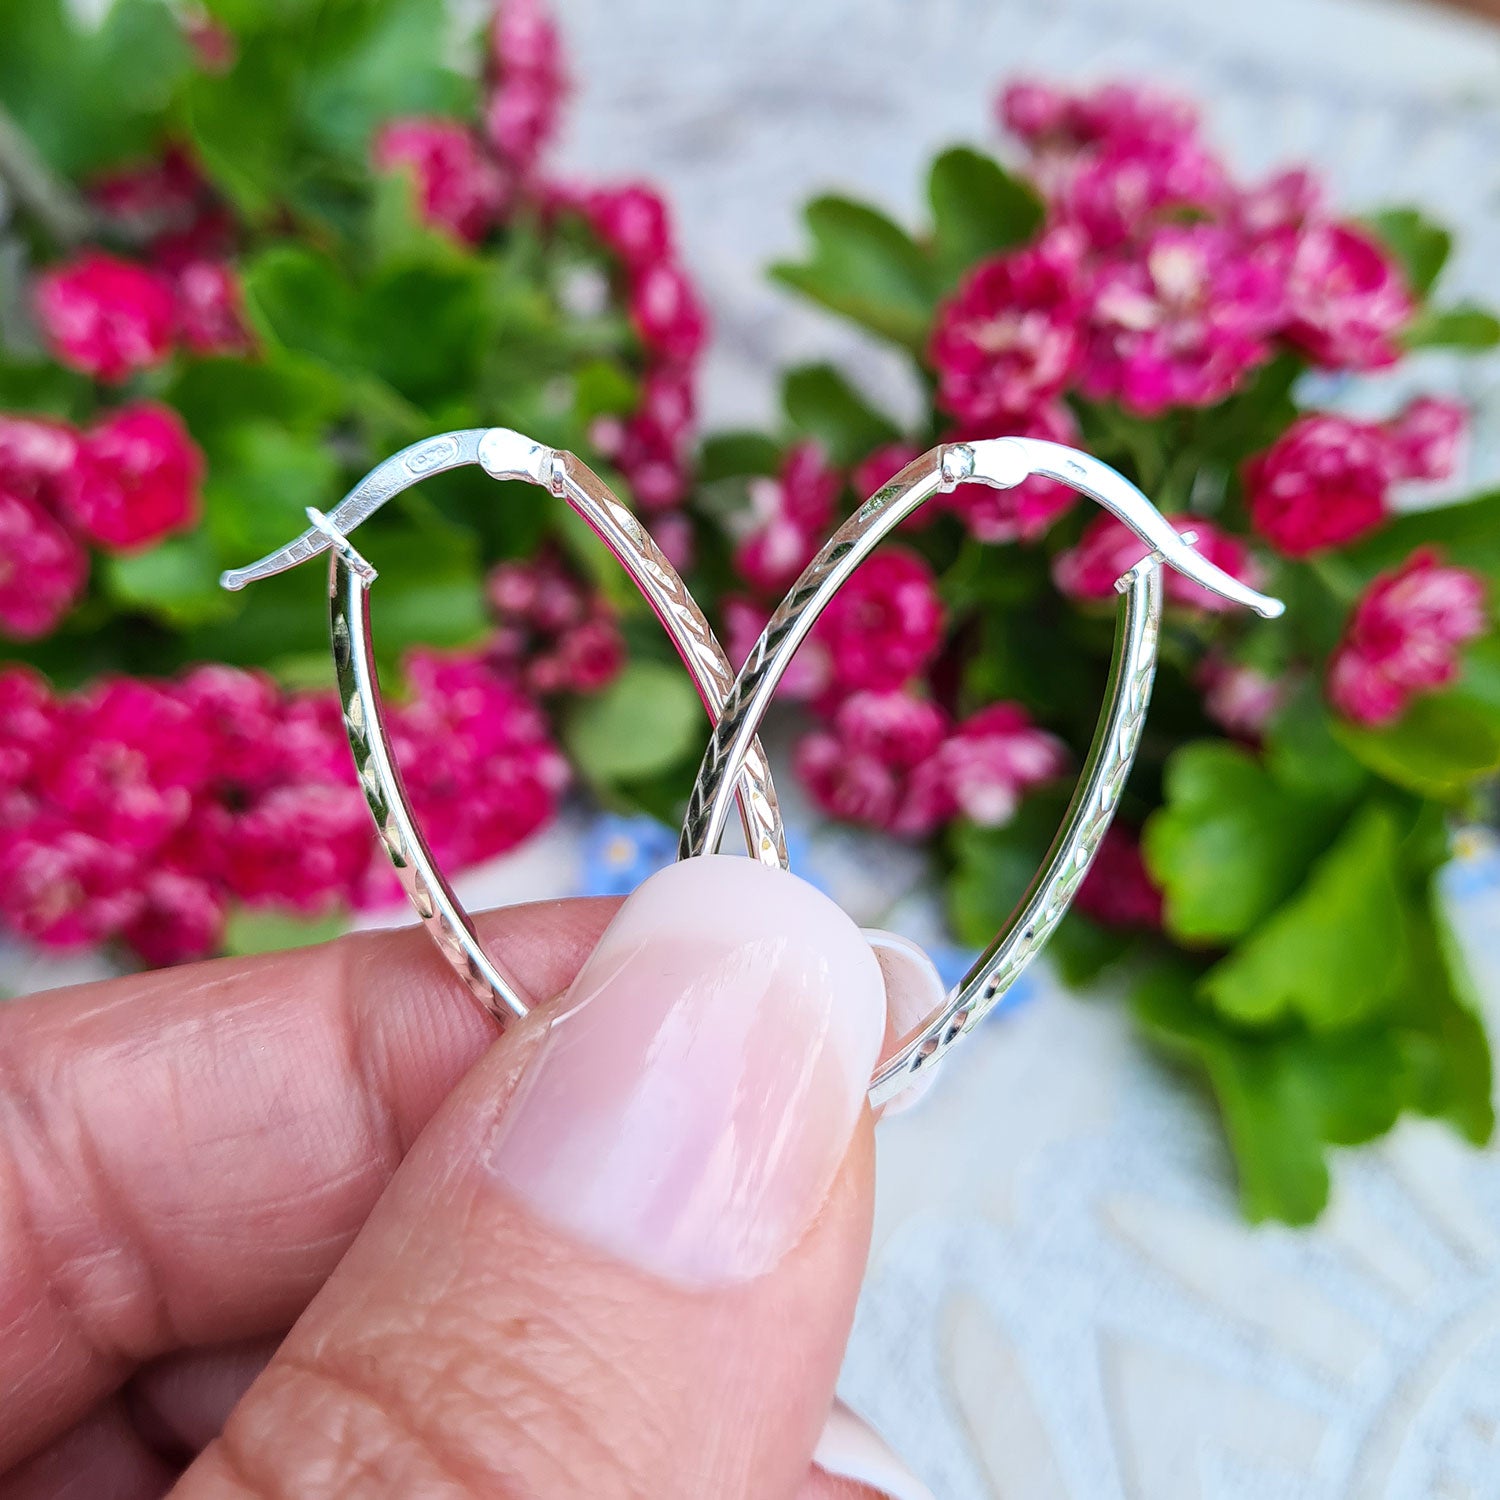 real 925 silver hoop earrings with patterned design